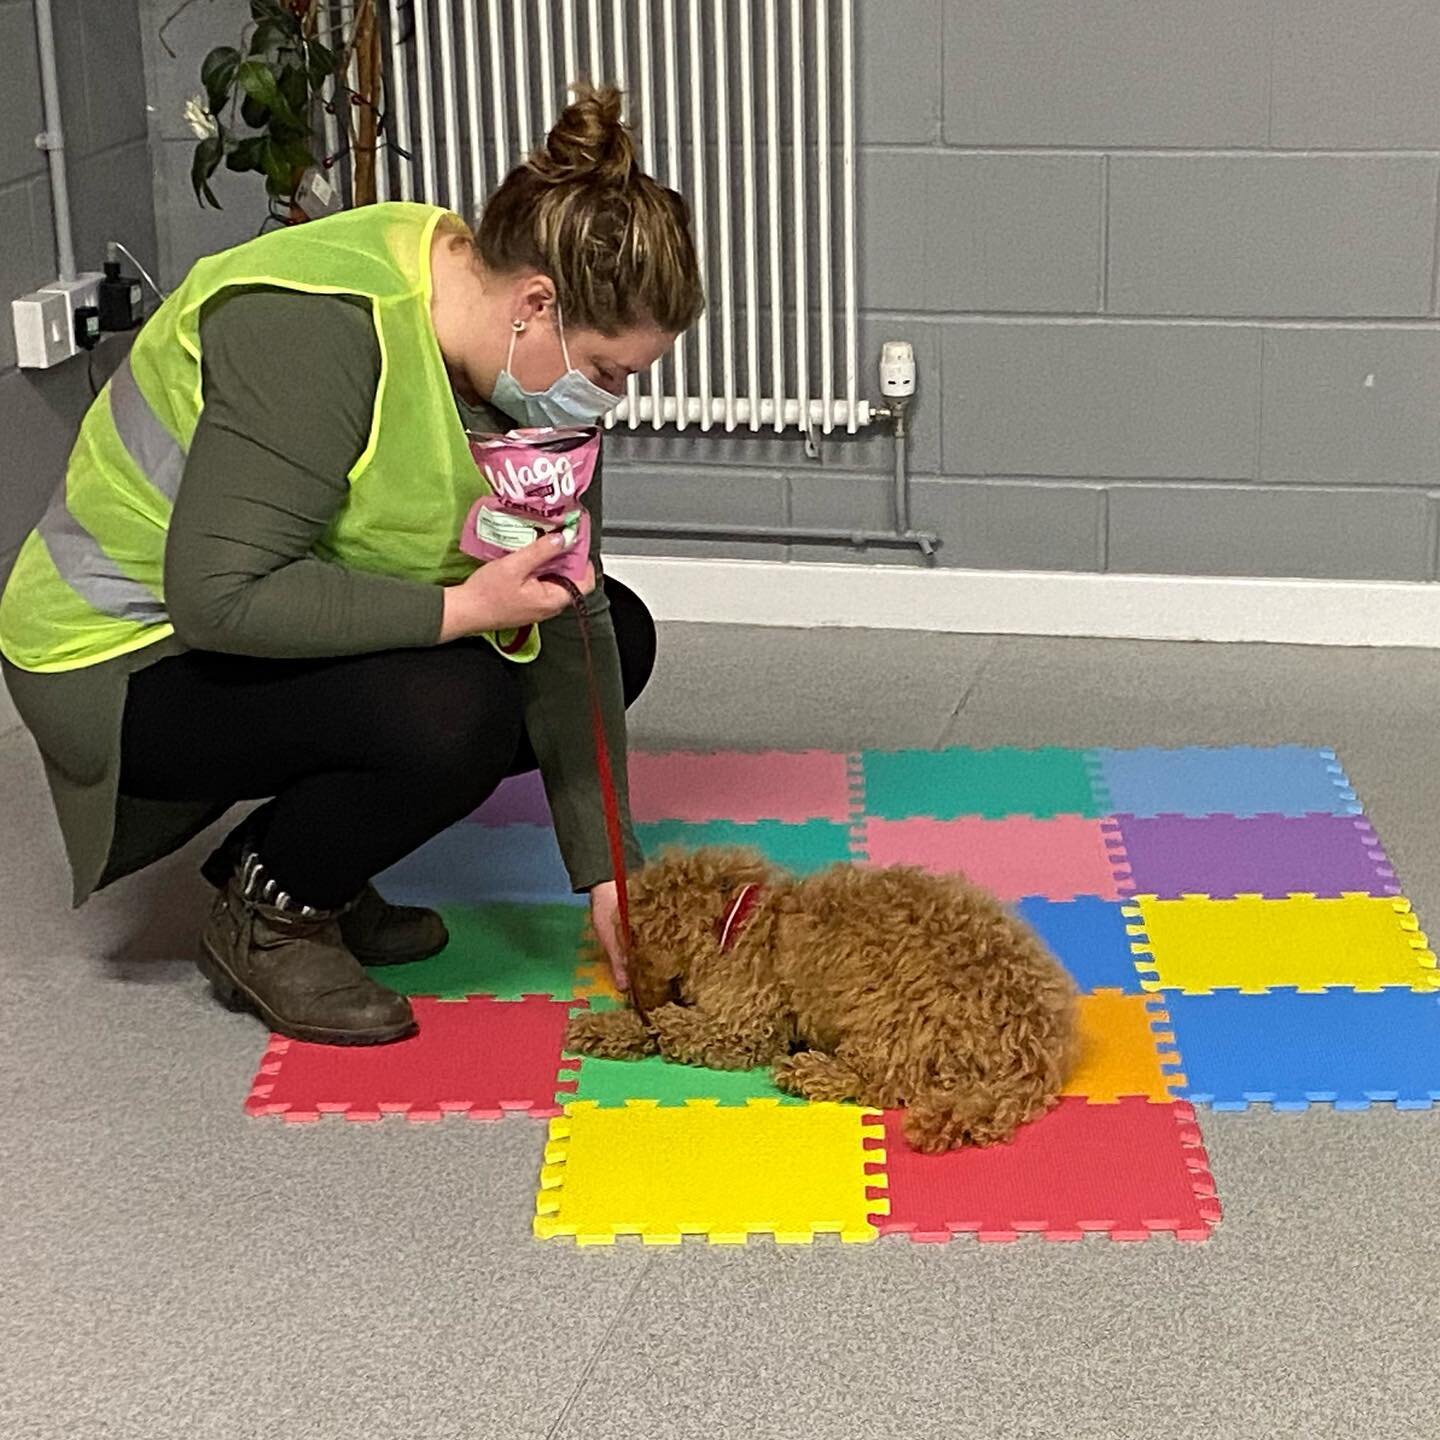 So much fun in Puppy Class yesterday evening learning how to teach the puppies to interact with new objects and surfaces, and how to make their first experiences as positive as possible! We used high vis, a rubber crumb mat, foam tiles, a traffic con